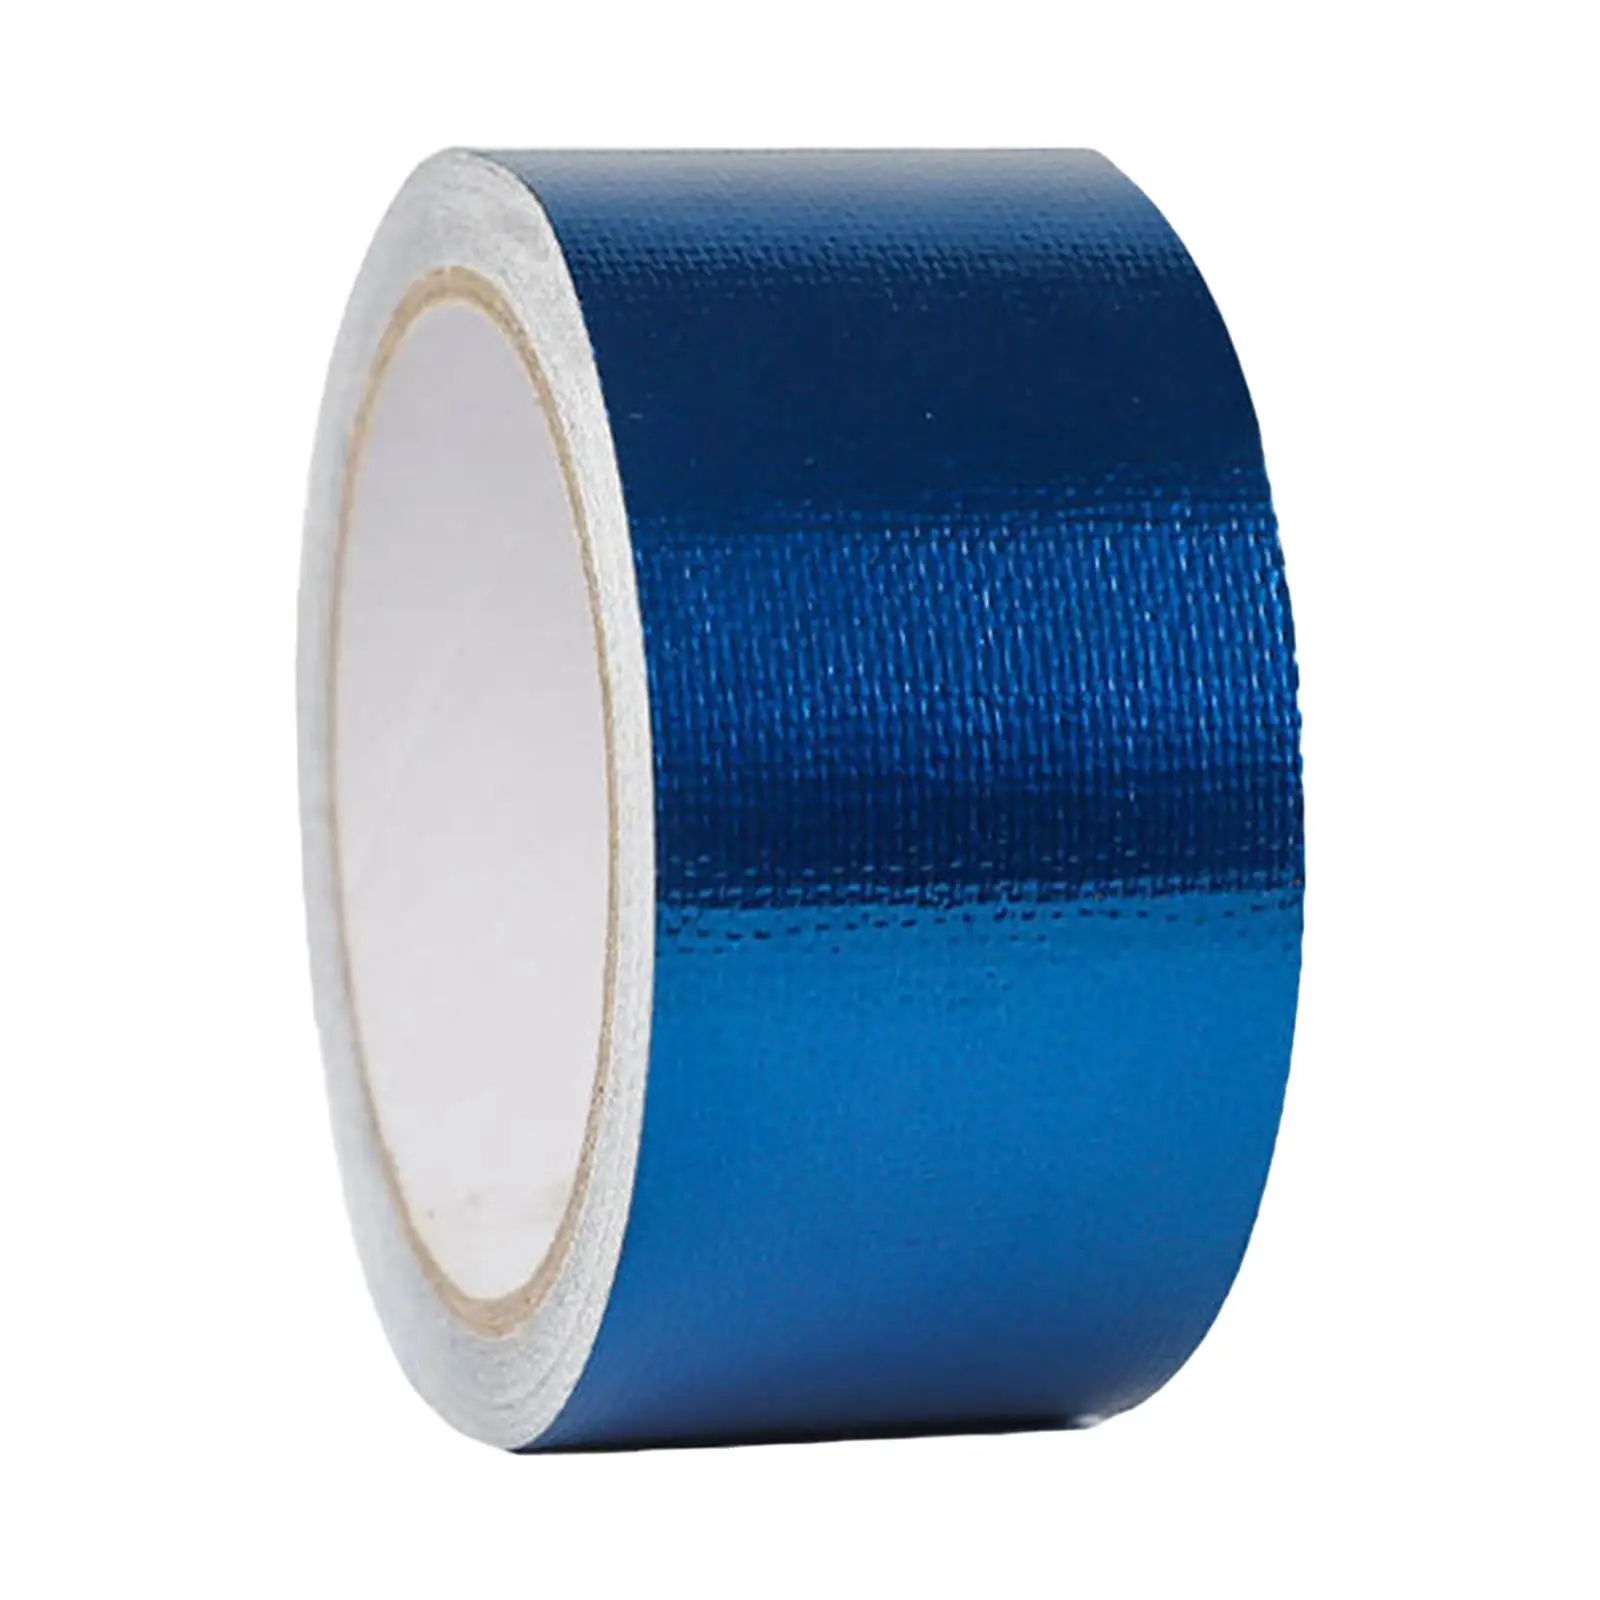 Awning Repair Tape Portable Pool Patch for Outdoor Daily Use Inflatable Toys